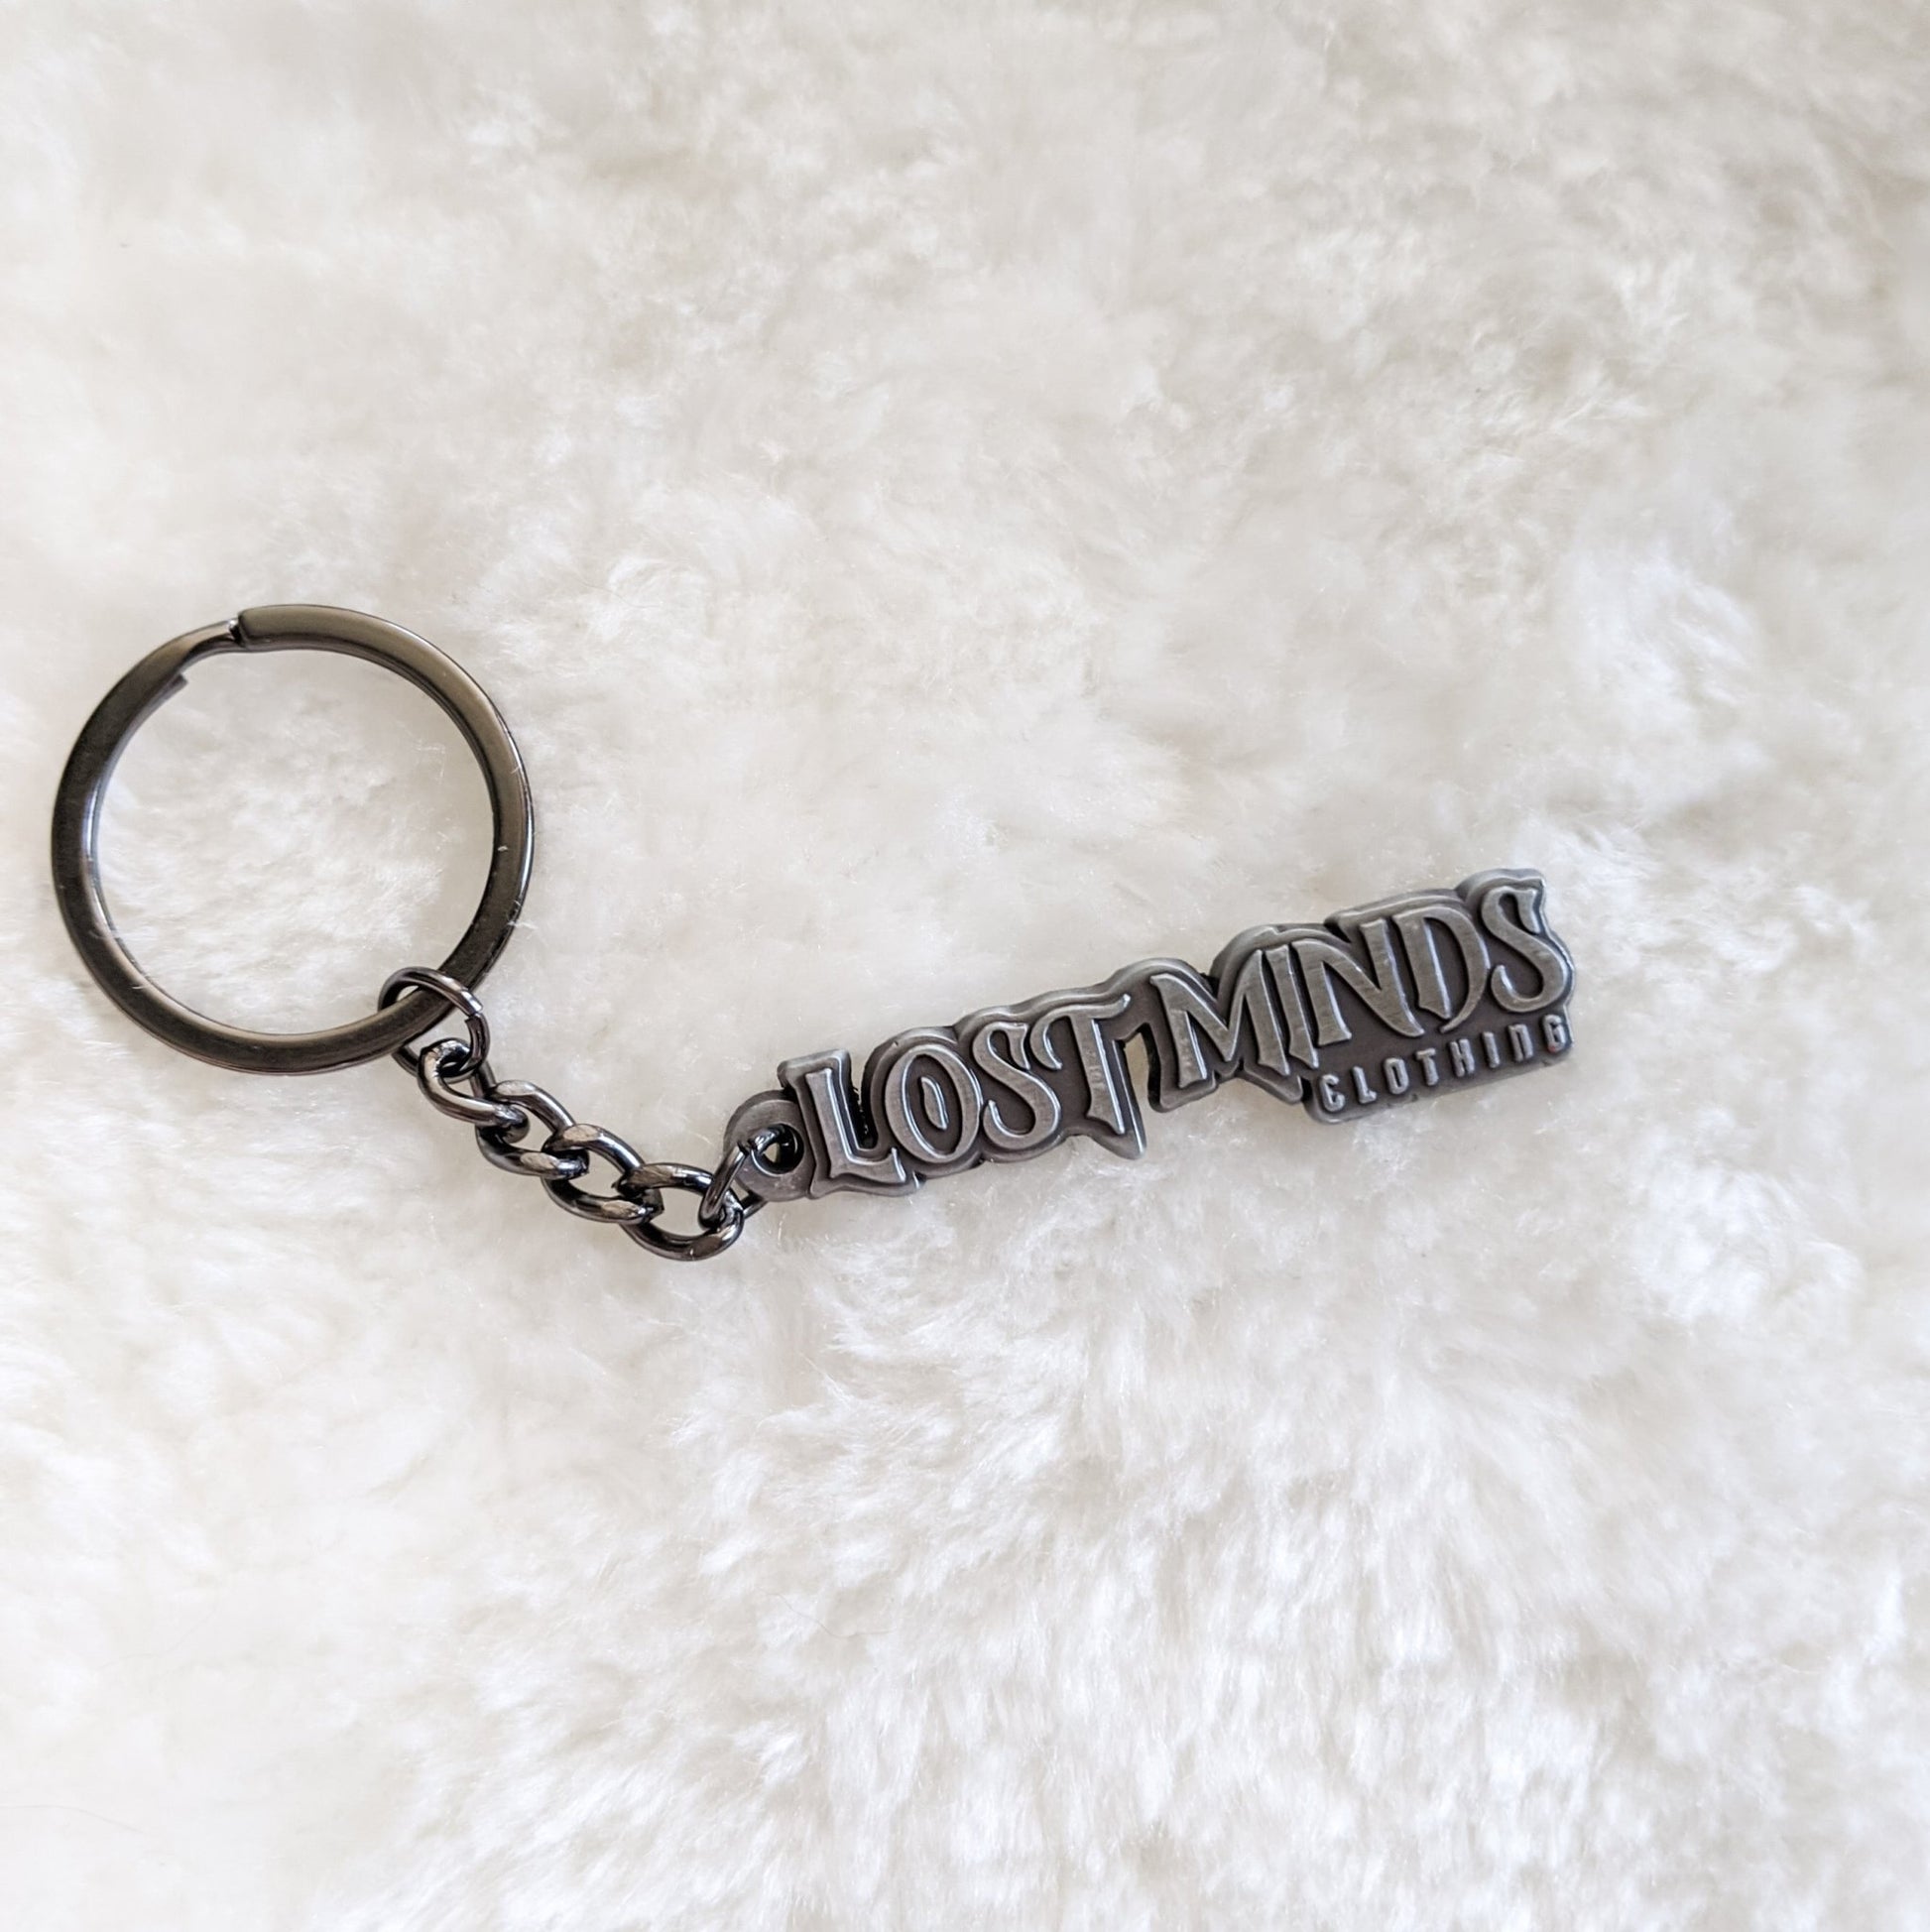 Lost Minds Keychain - Gunmetal - Lost Minds Clothing